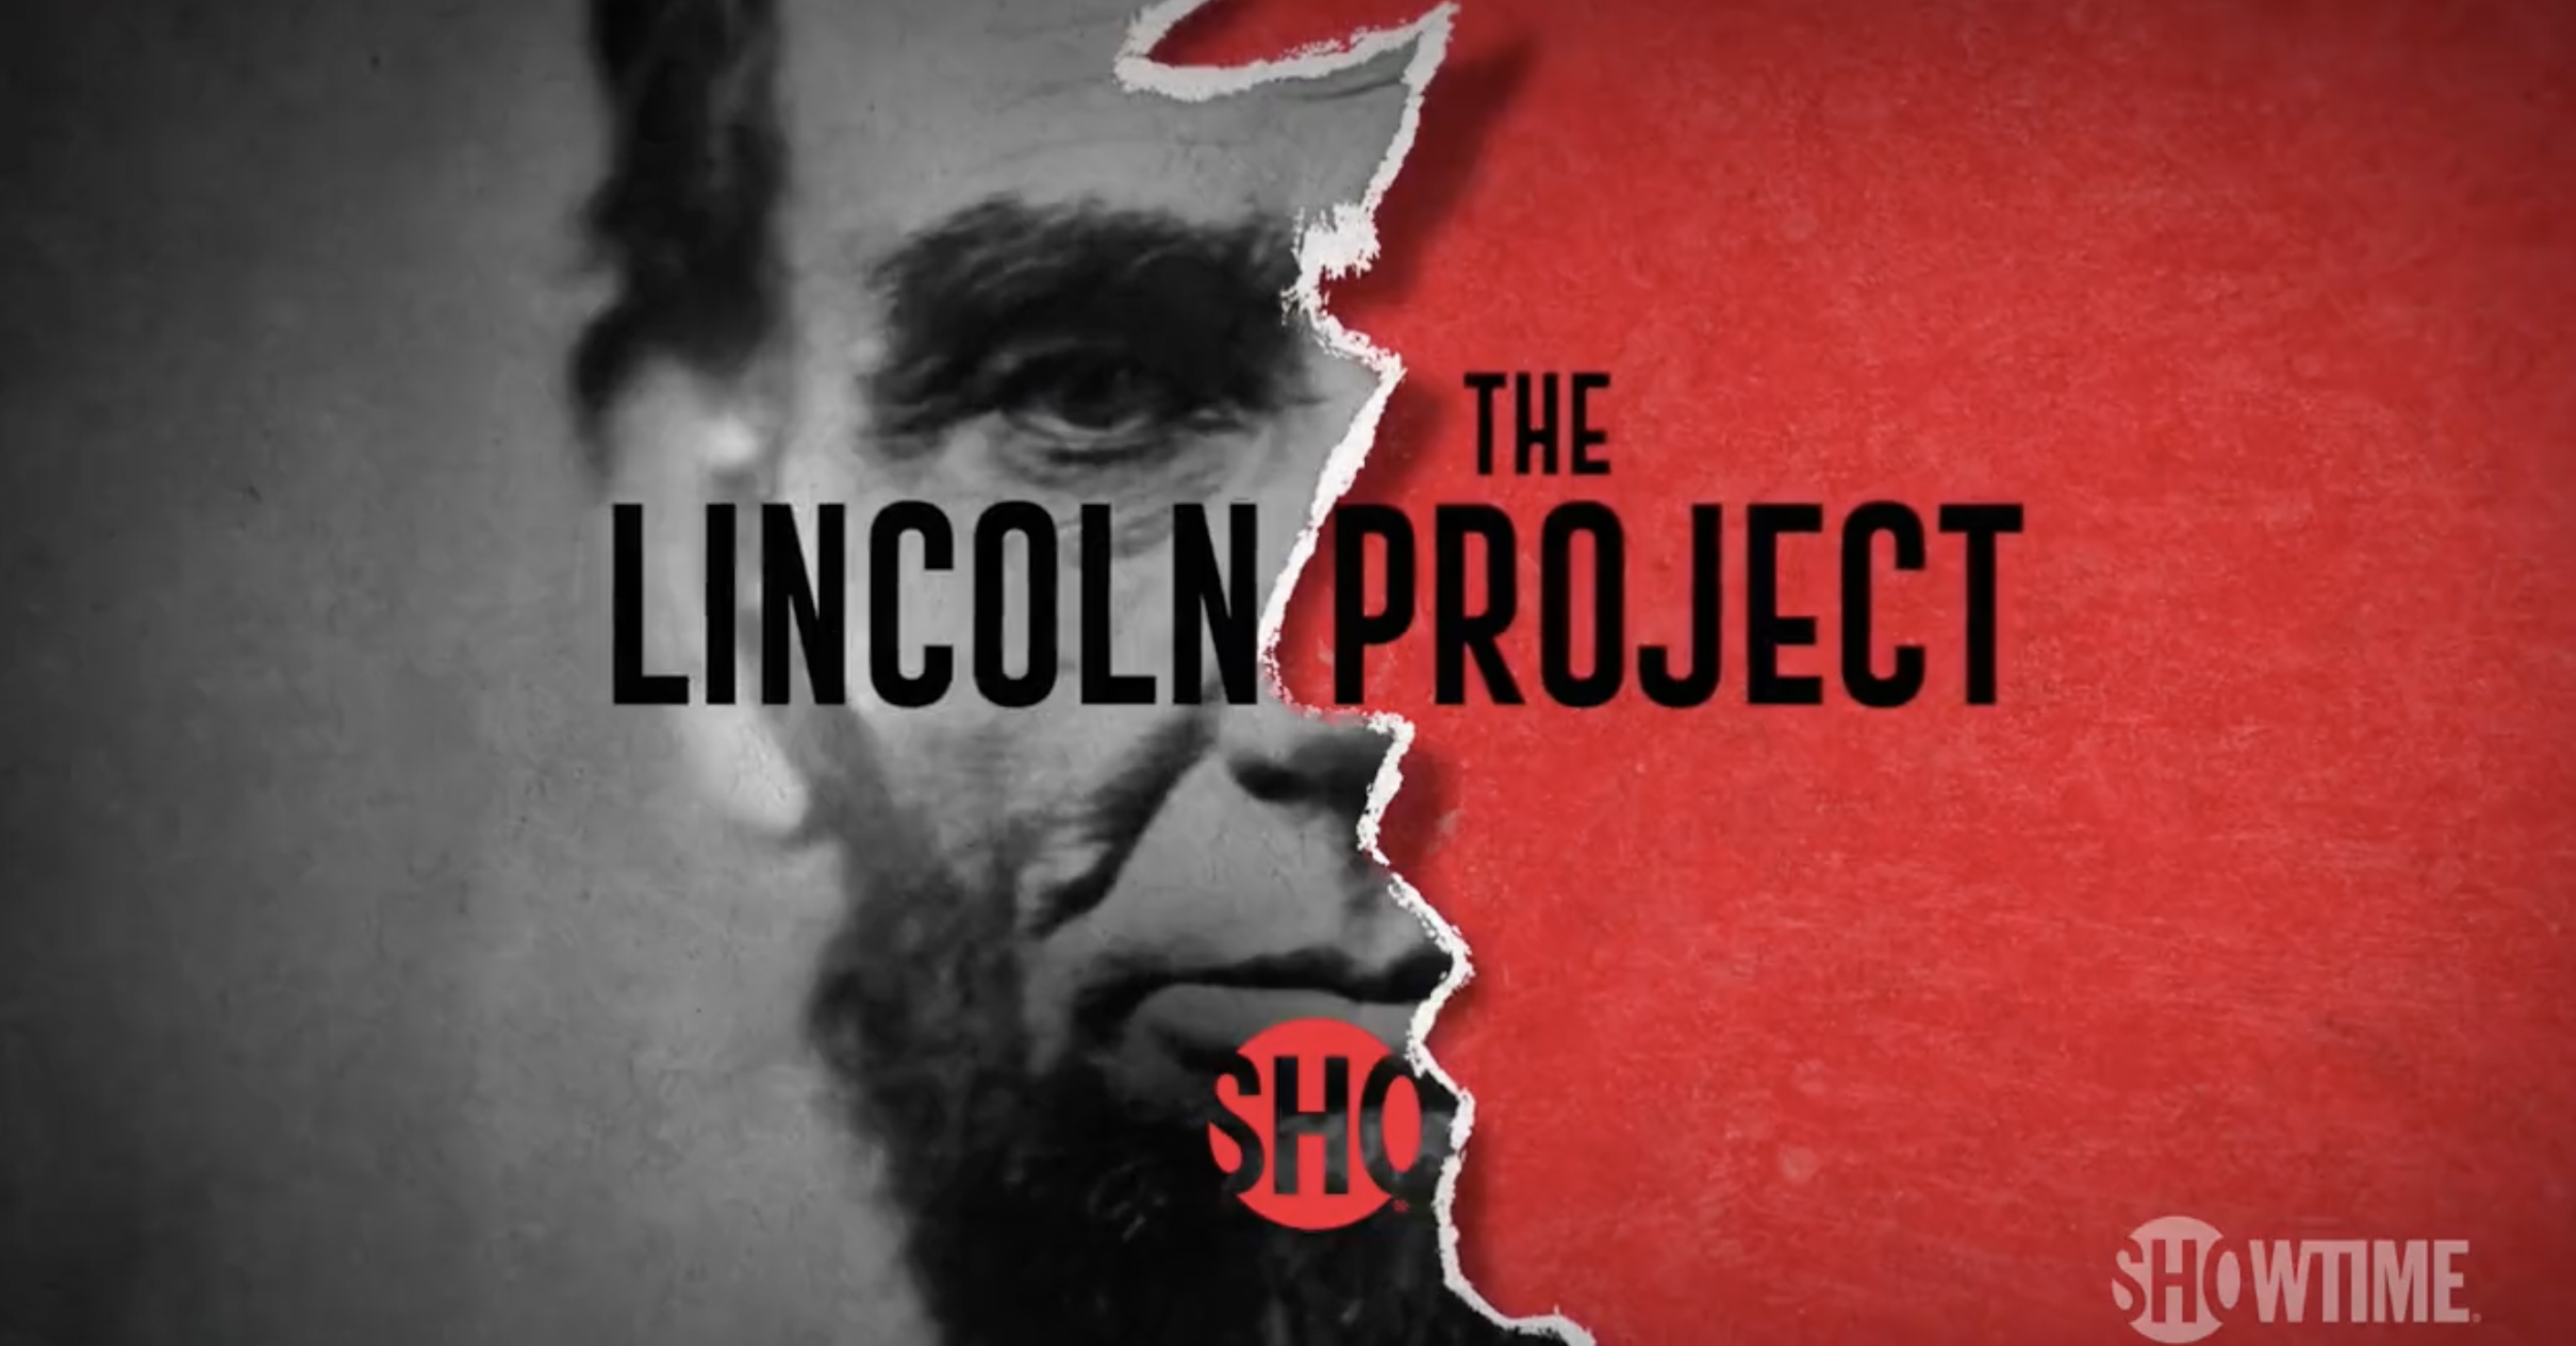 ‘Nothing Noble About Us, But We’re Useful’: Showtime Drops Trailer for Series on Rise of Controversial Lincoln Project